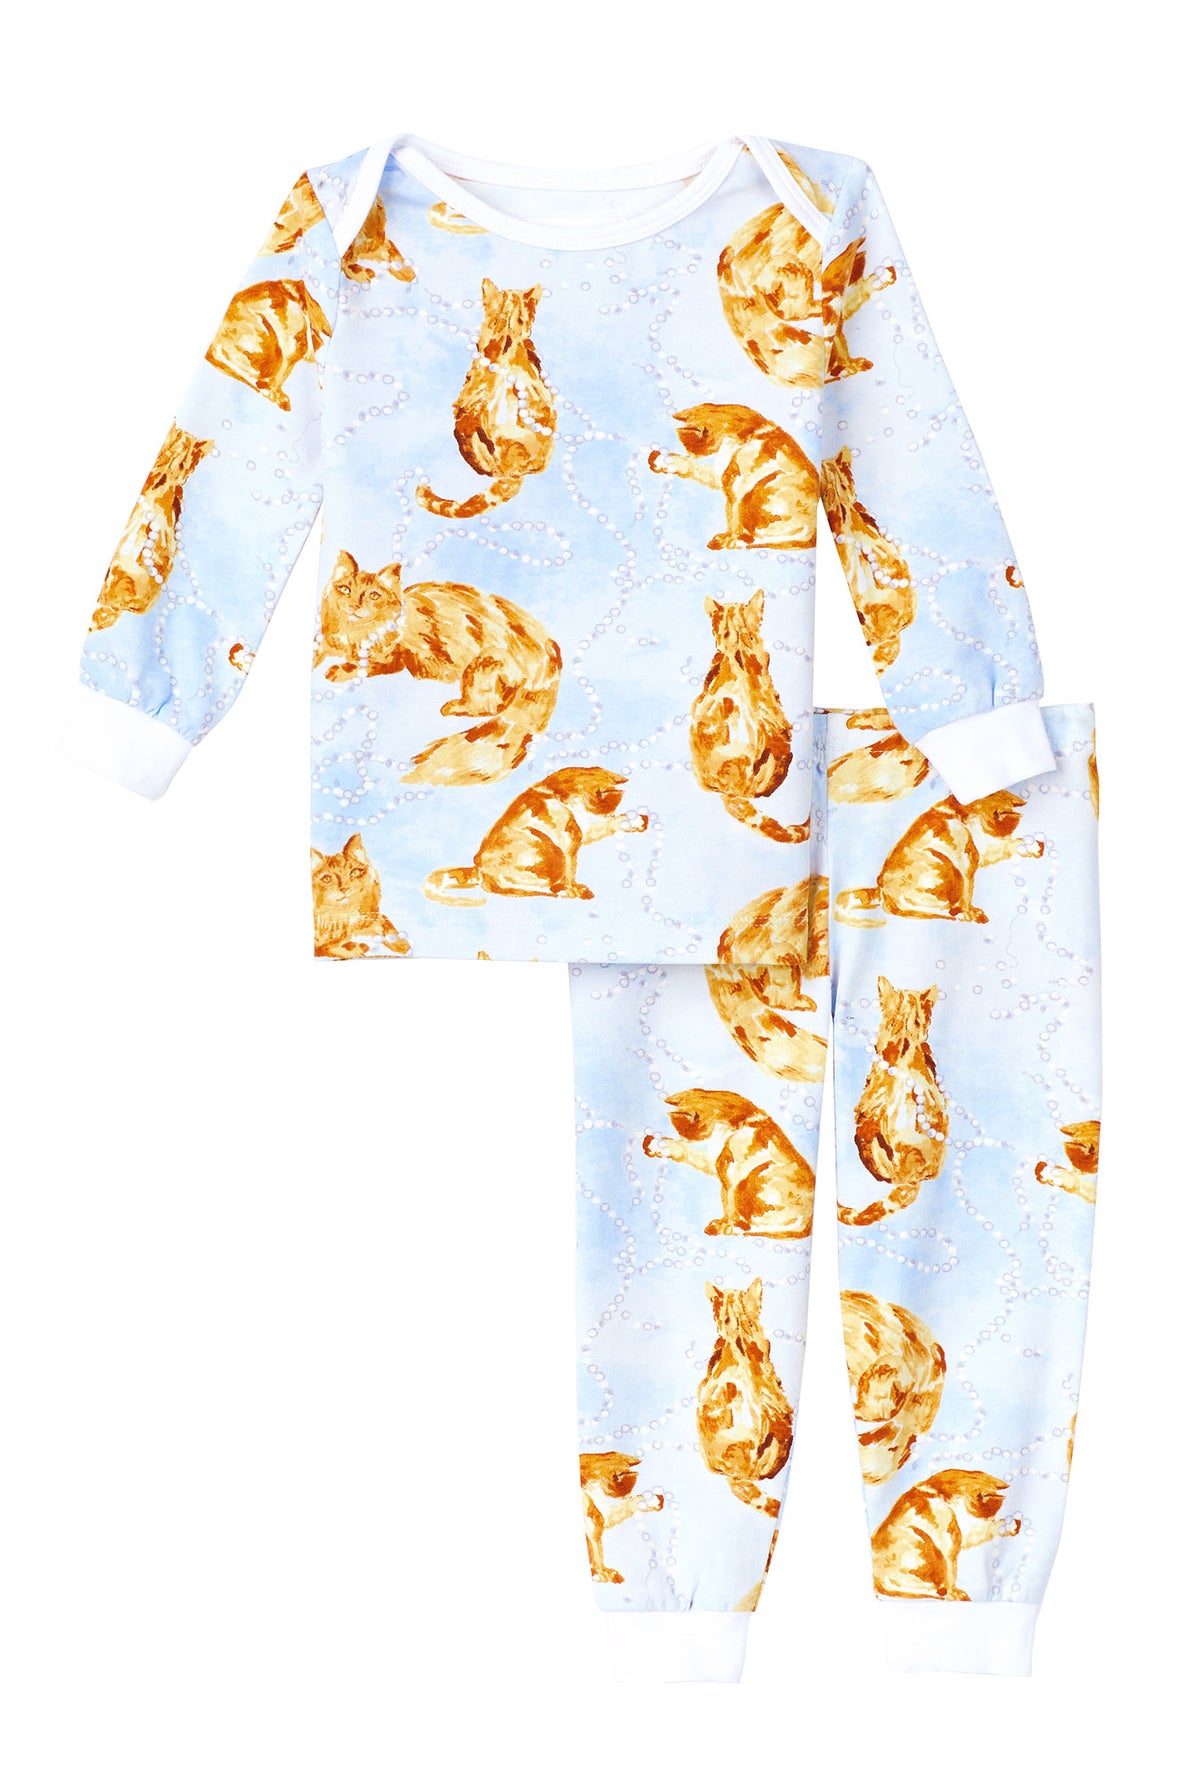 A baby wearing blue long sleeve stretch jersey boo boo pj set with fancy cats print.